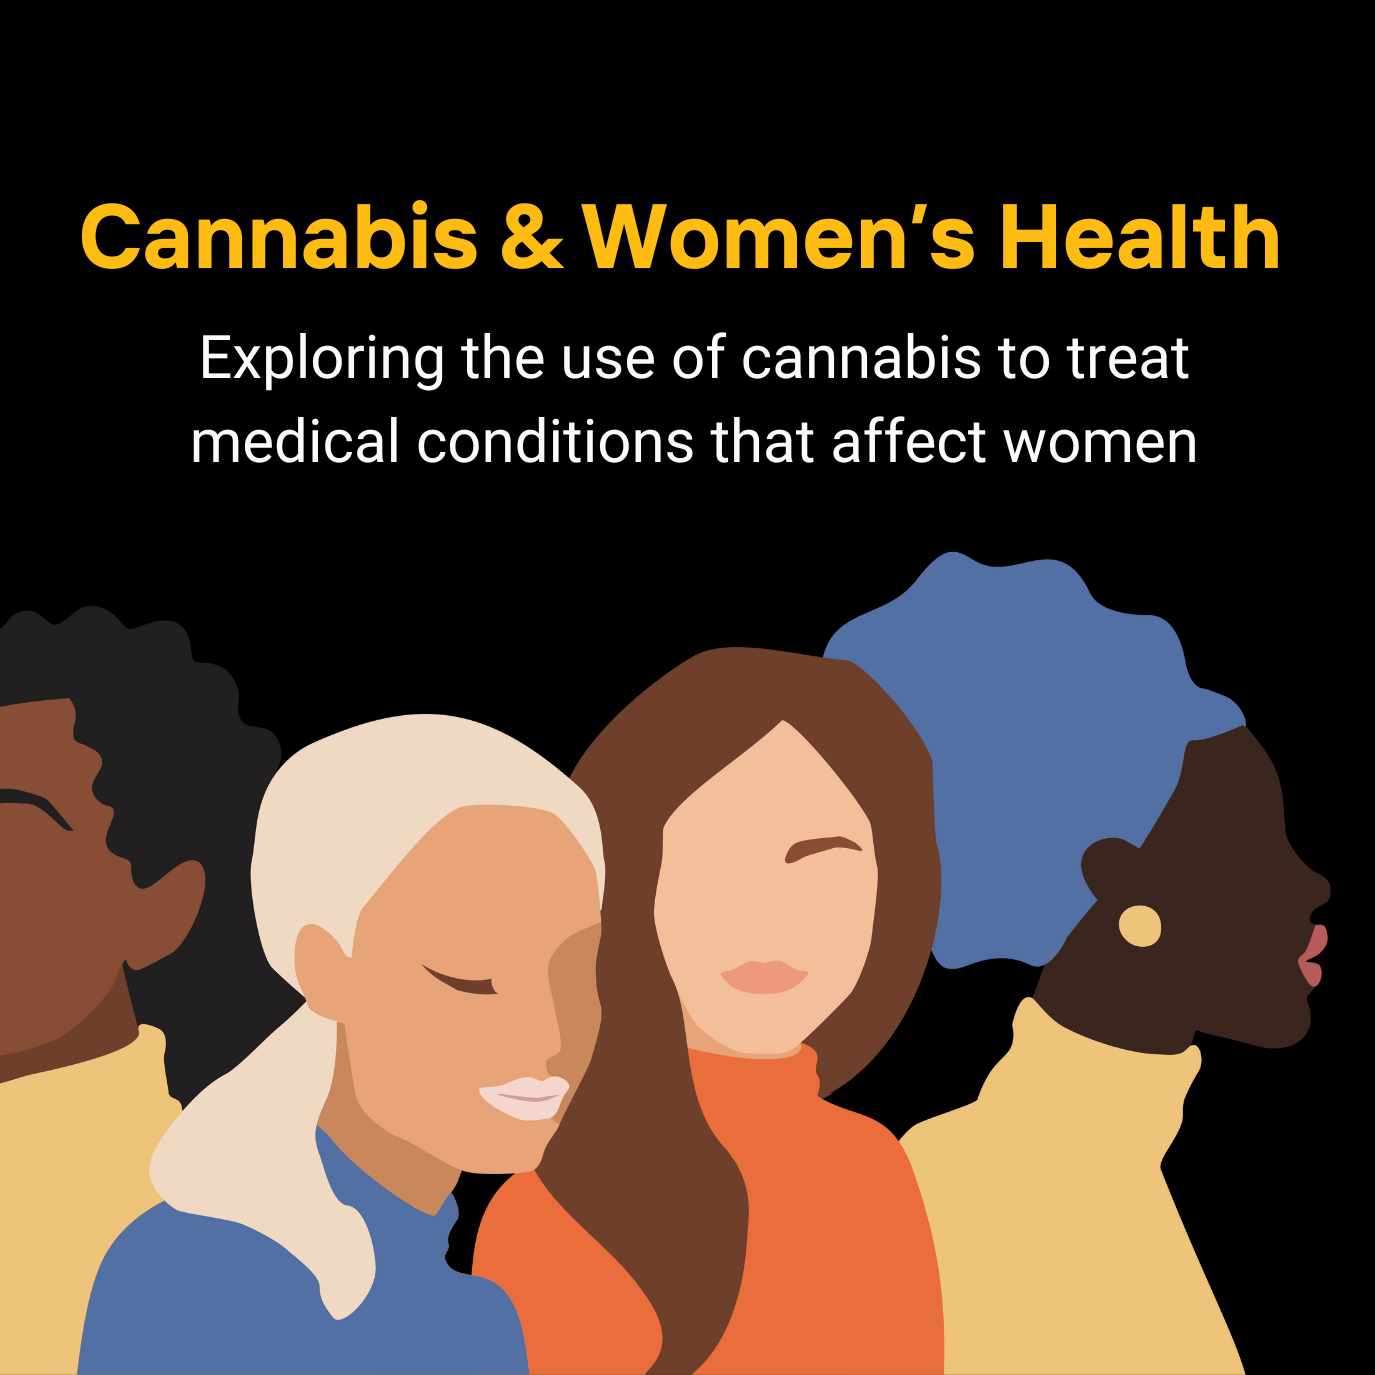 Exploring the use of cannabis to treat medical conditions that affect women